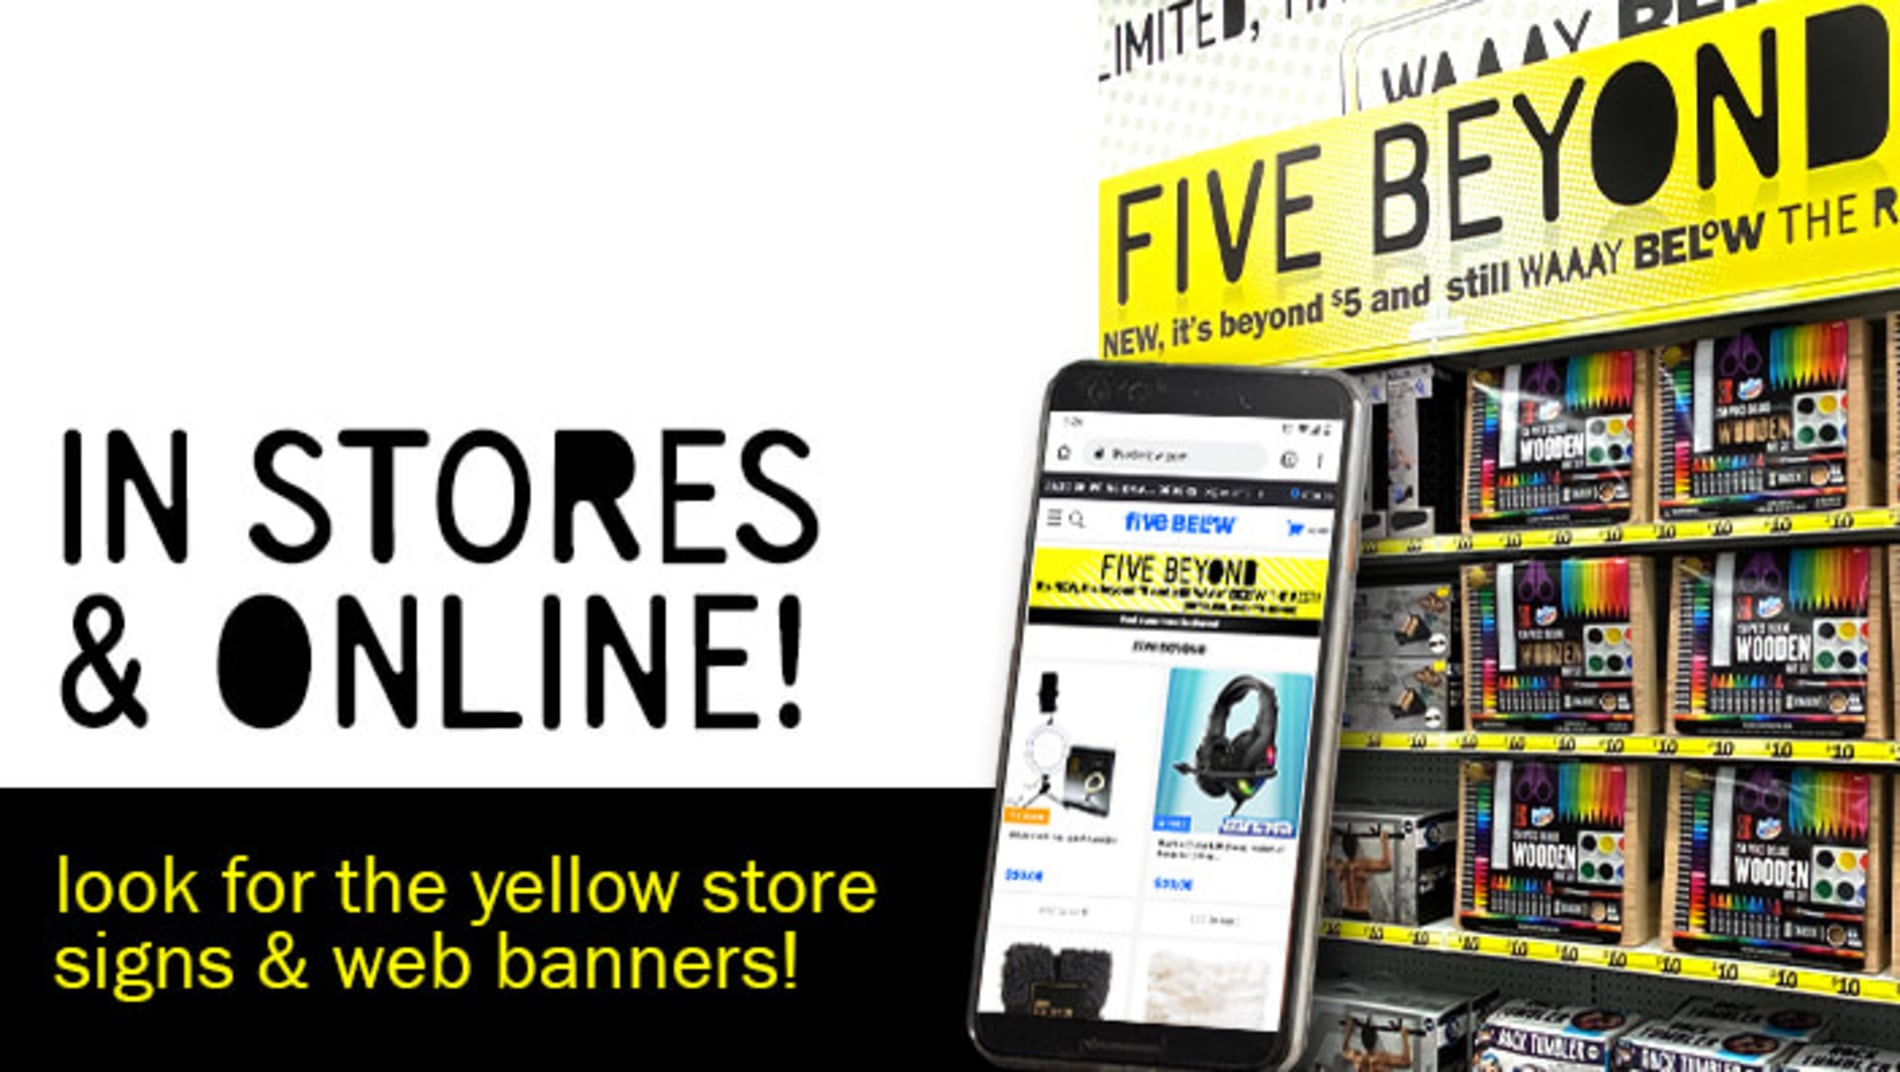 in stores & online! look for the yellow store signs & web banners!